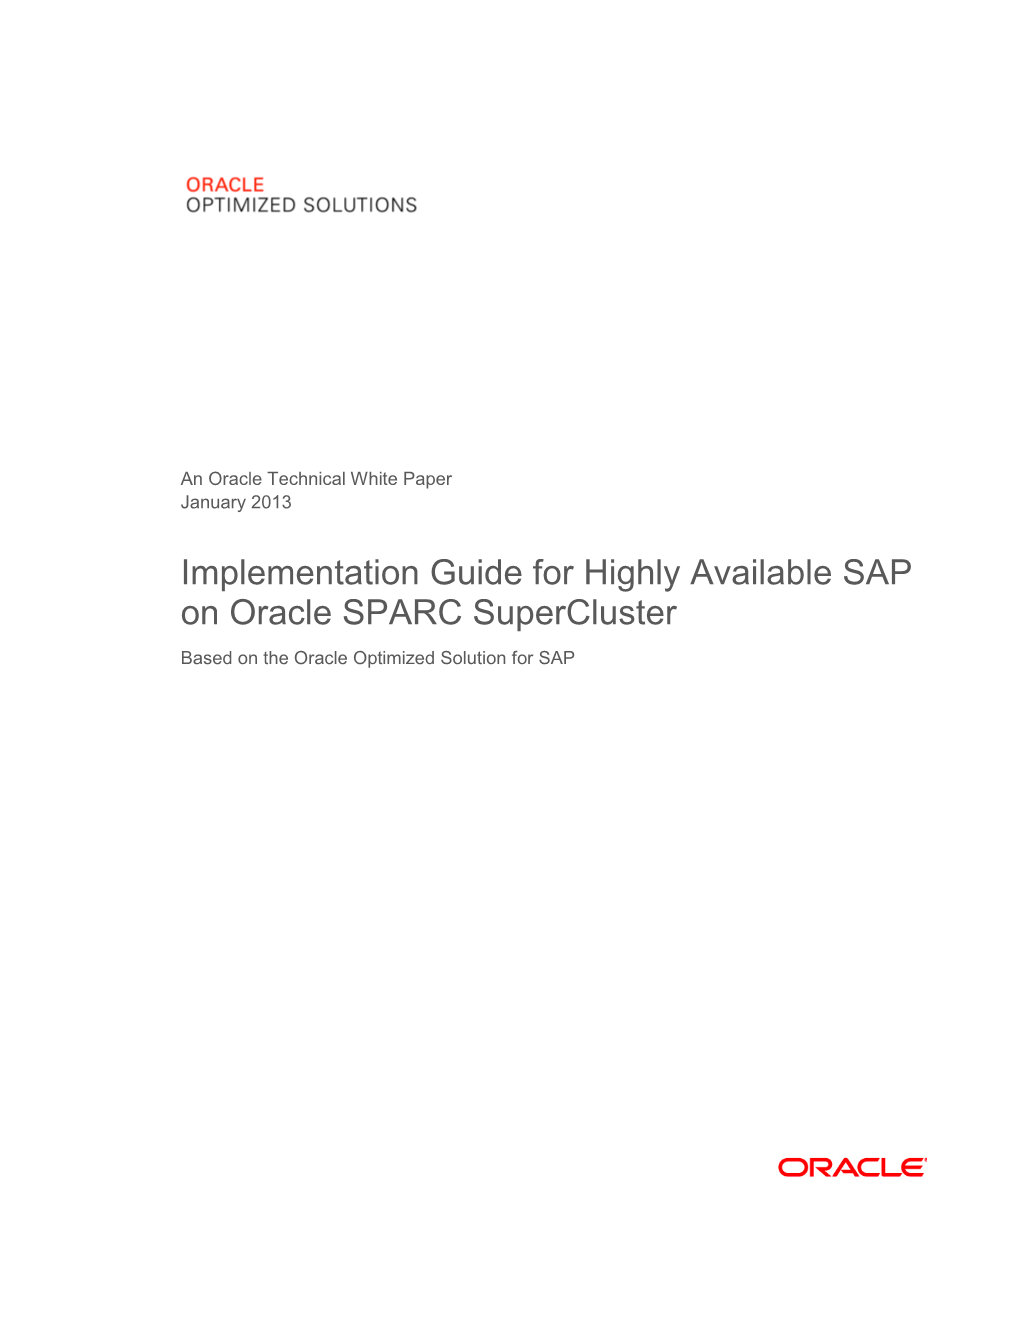 Implementation Guide for Highly Available SAP on Oracle SPARC Supercluster Based on the Oracle Optimized Solution for SAP